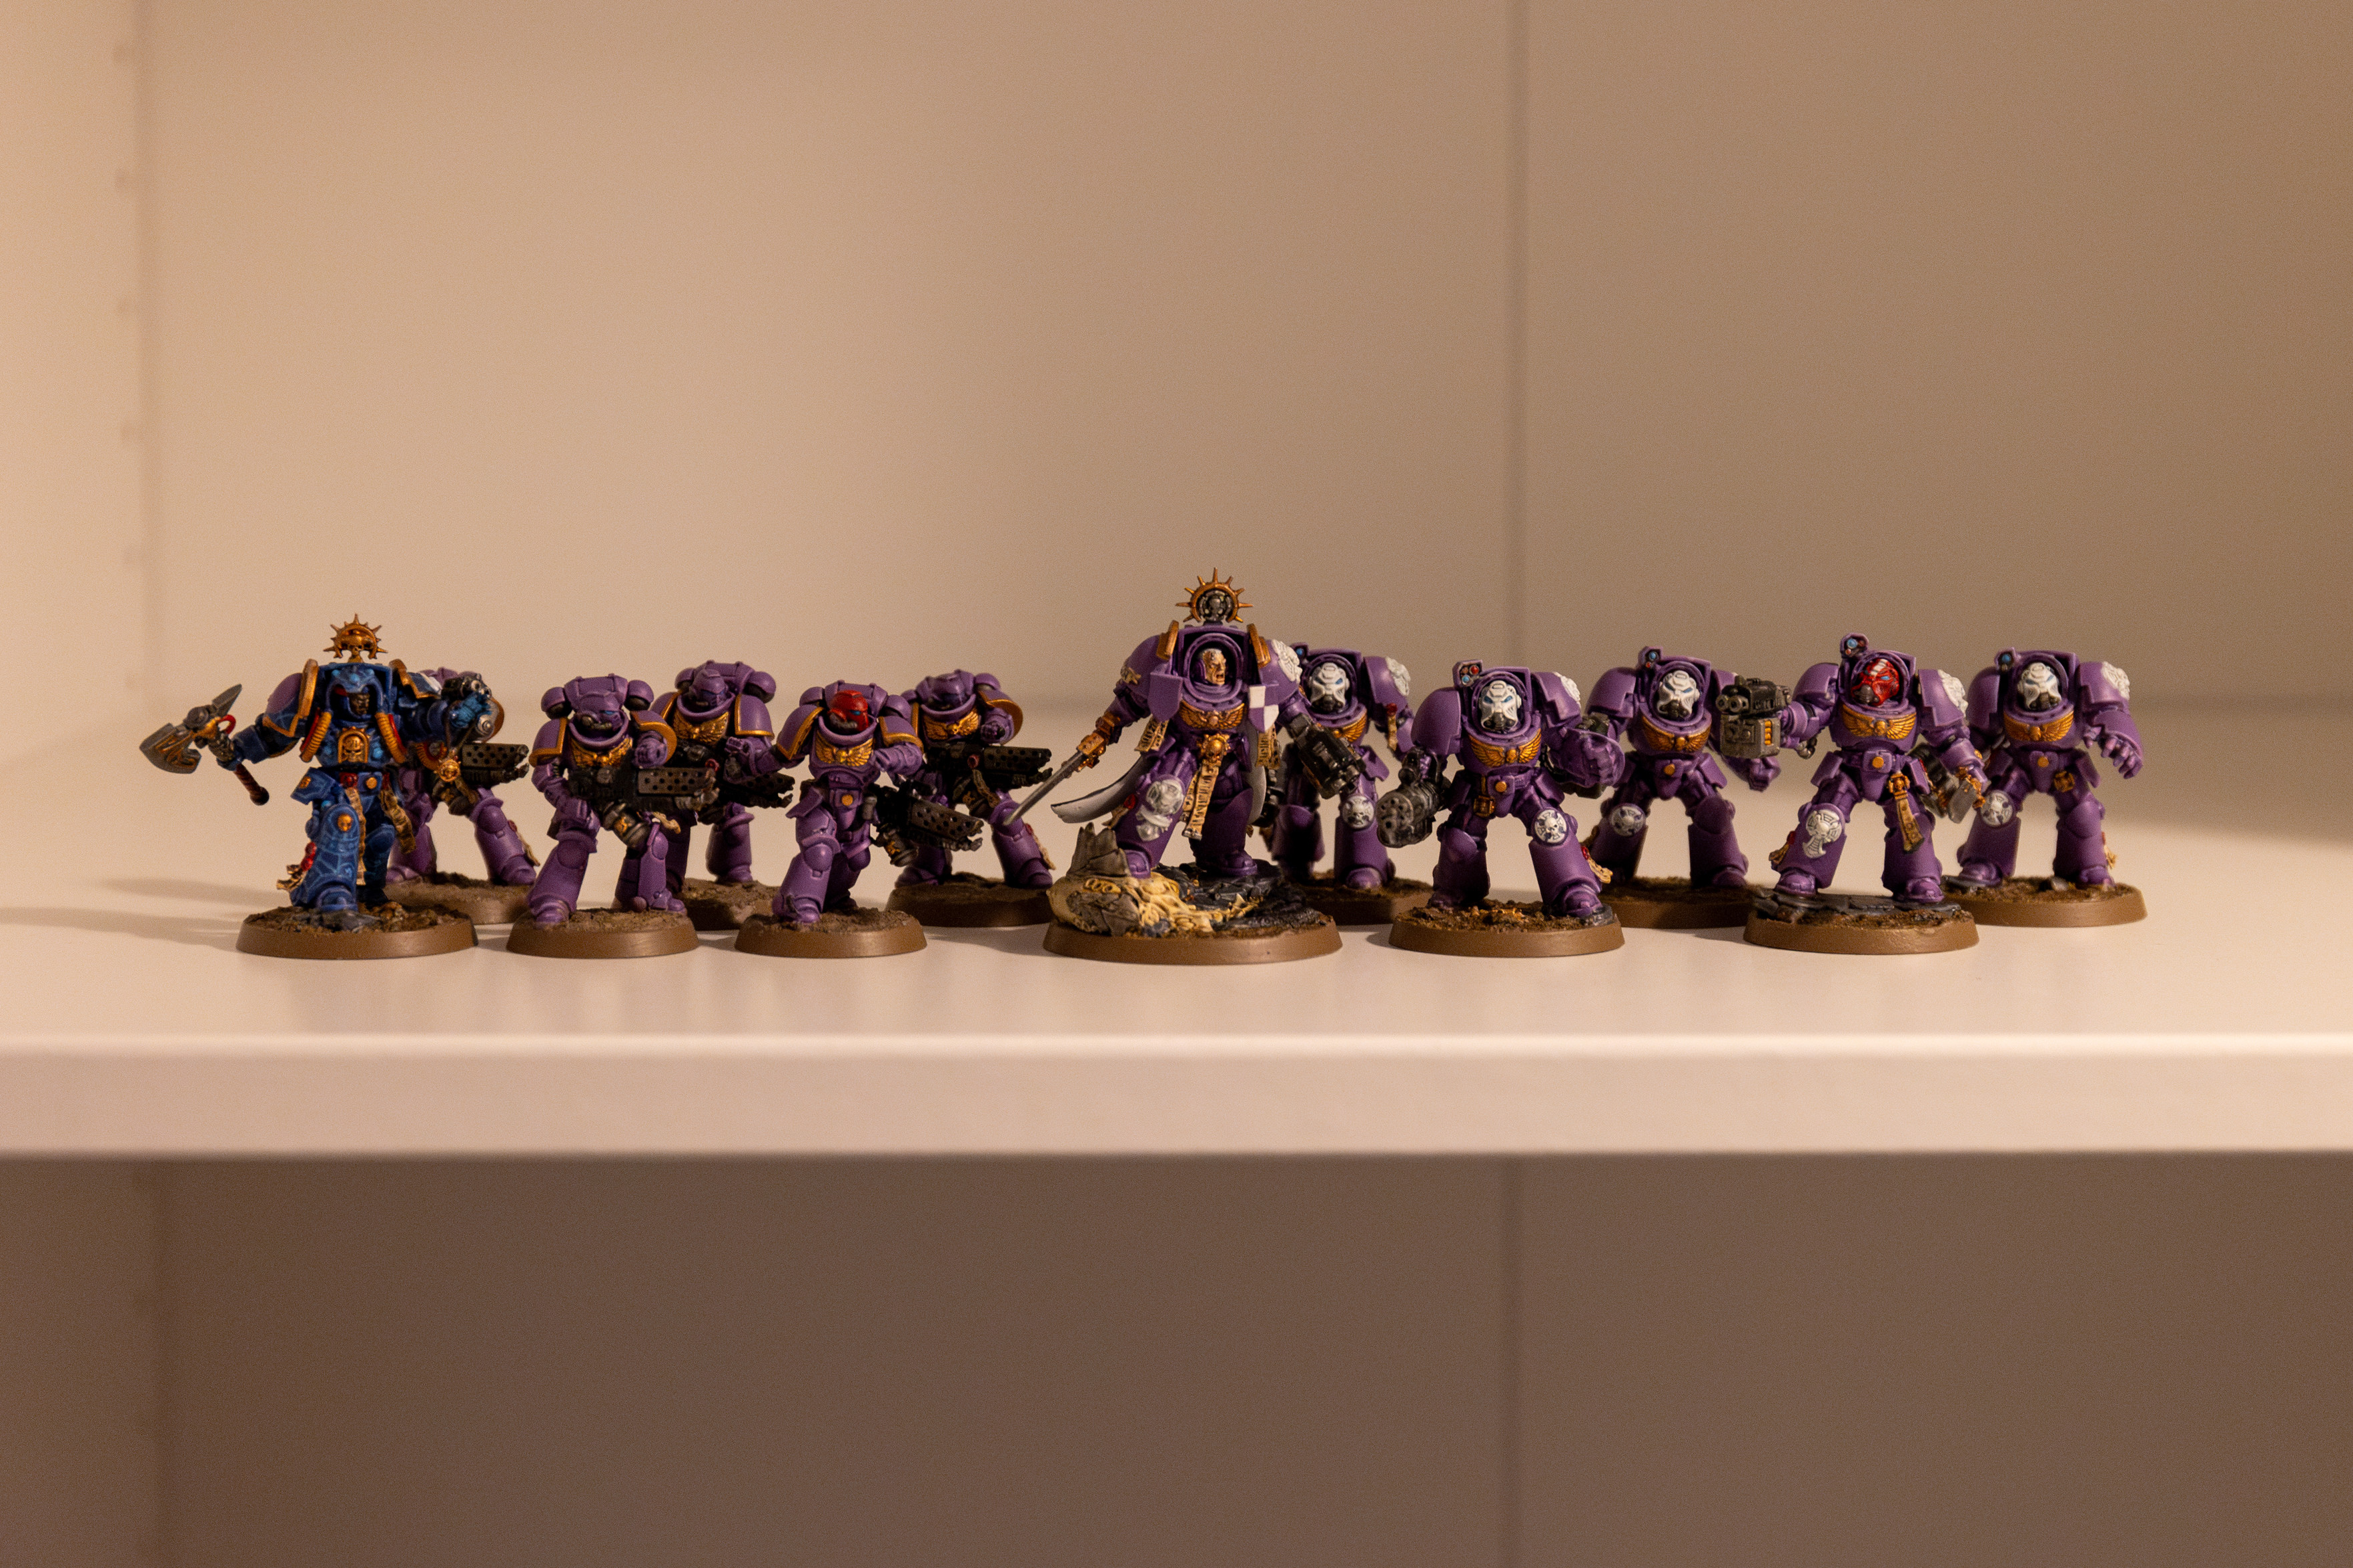 12 Space Marines stood in two ranks. From left to right there’s a Terminator Librarian in dark blue armour with gold trim. His right hand is behind him holding and axe and his right hand is upheld and glowing blue. There’s then a squad of 5 Infernus Marines, there are all in purple and gold armour, with the Sergeant having a red helmet. They are all holding a flame thrower, the Sergeant has his strapped behind him and is throwing a grenade. Next is a Captain in Terminator armour. He is in purple and gold armour and is stood on the corpse of a Tyranid and some rocks. He has a gun in his left hand and a sword in his right. To the right of him is a squad of 5 Terminators in purple and gold armour. These have white helmets except the sergeant who has a red helmet with white stripe. The non-Segargent models have guns and powerfits, while the Sergeant has a gun and a sword.